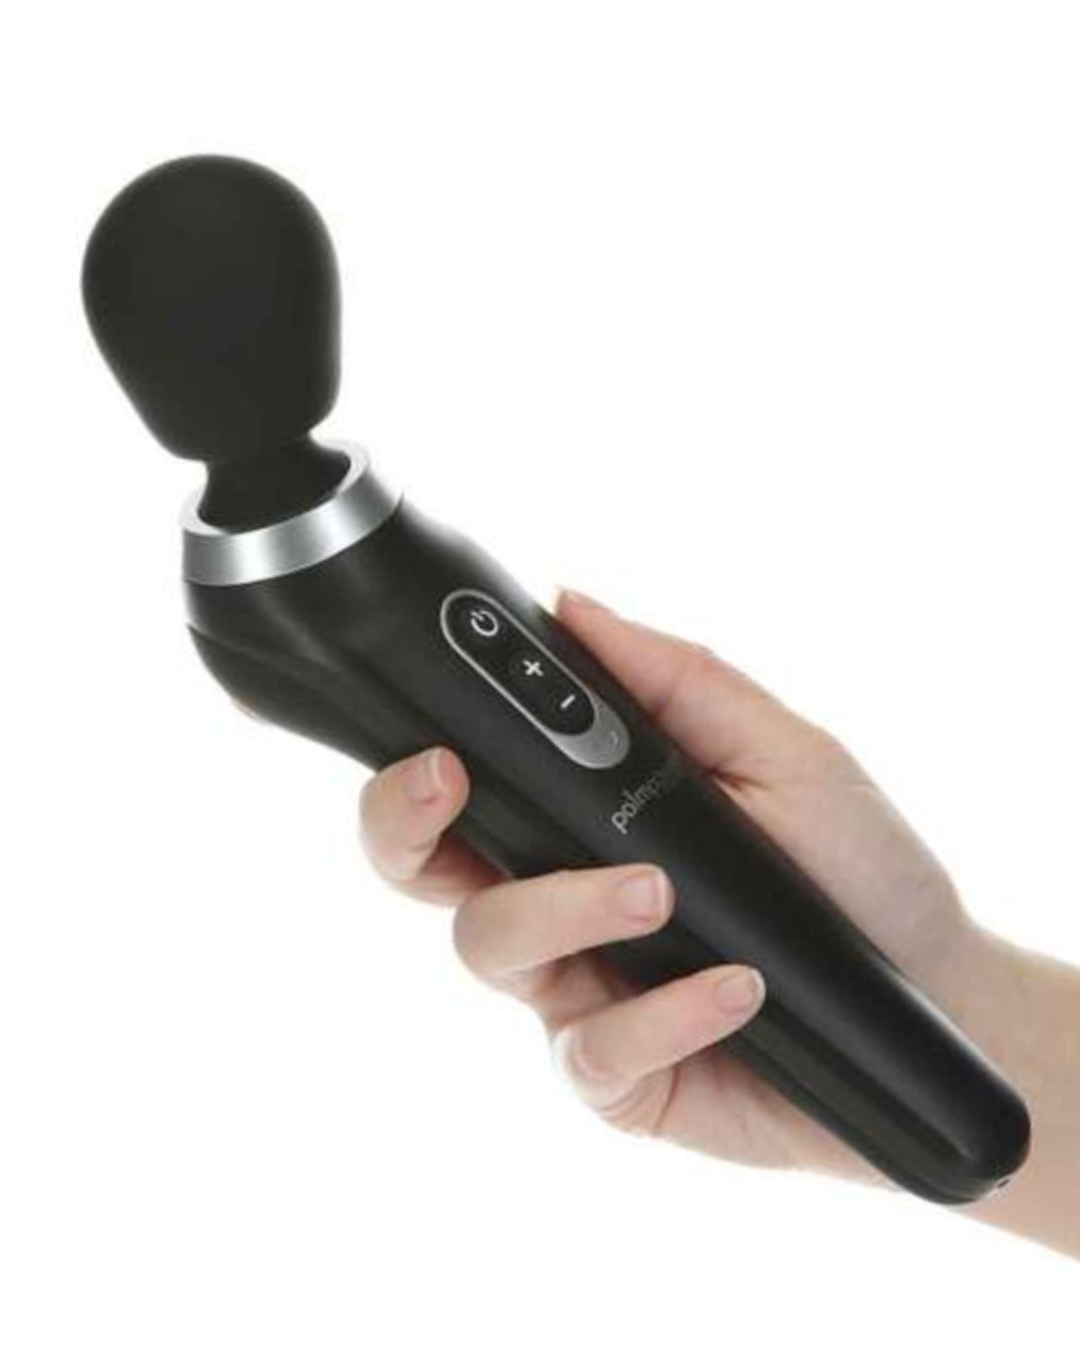 Palm Power Extreme Wand Vibrator  - Black held in a hand